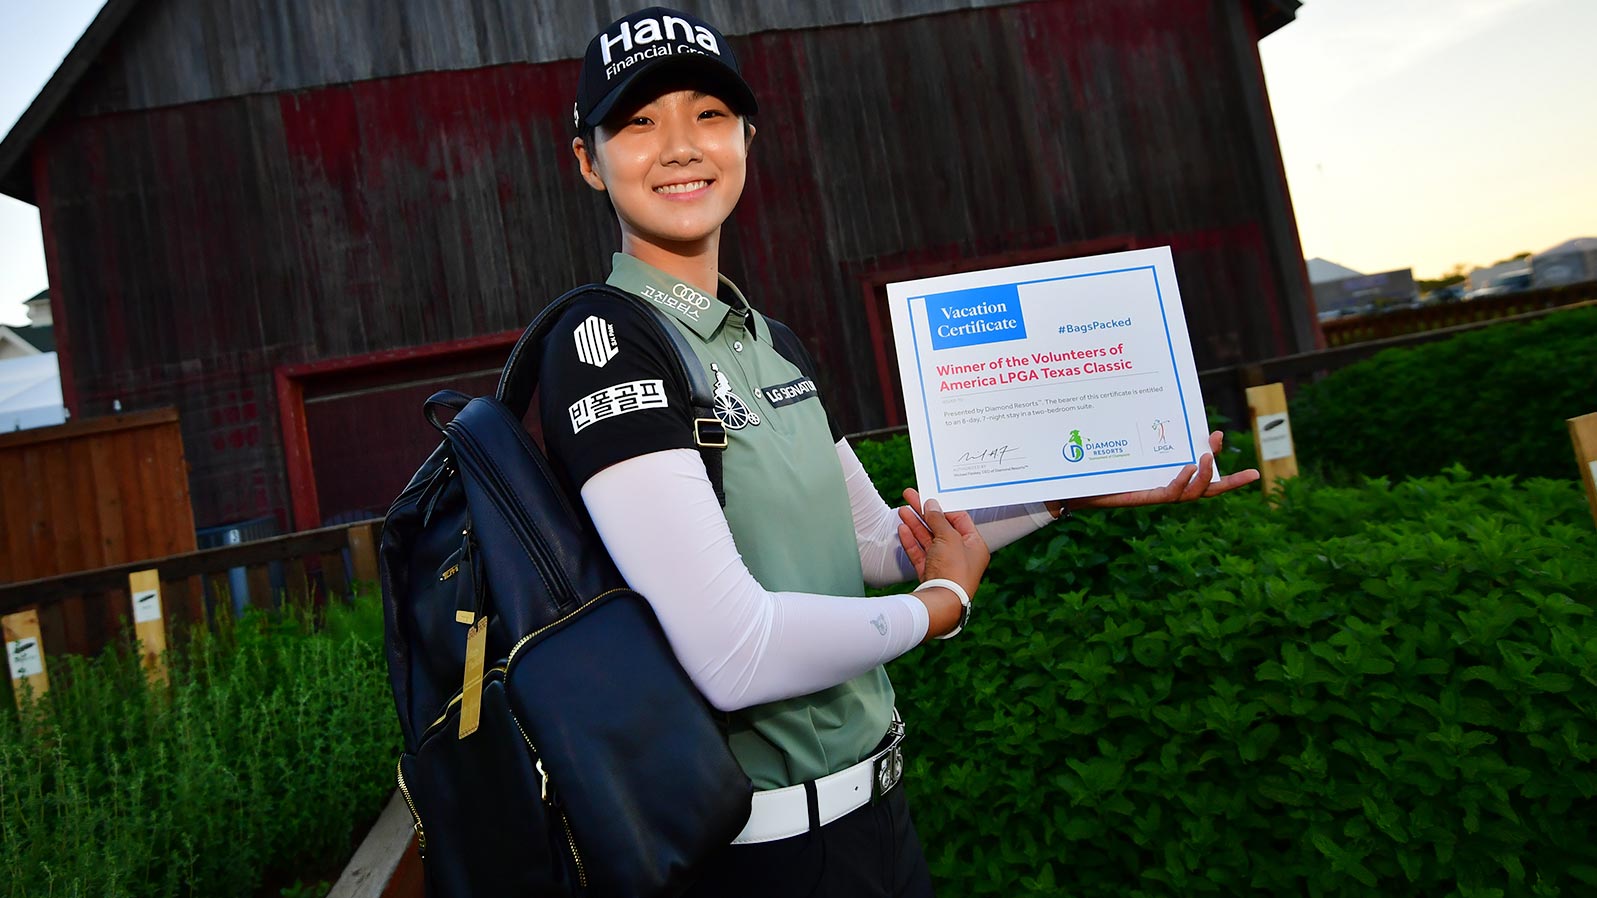 Sung Hyun Park has her #BagsPacked for the 2019 Diamond Resorts Tournament of Champions after her victory at the VOA Texas Classic